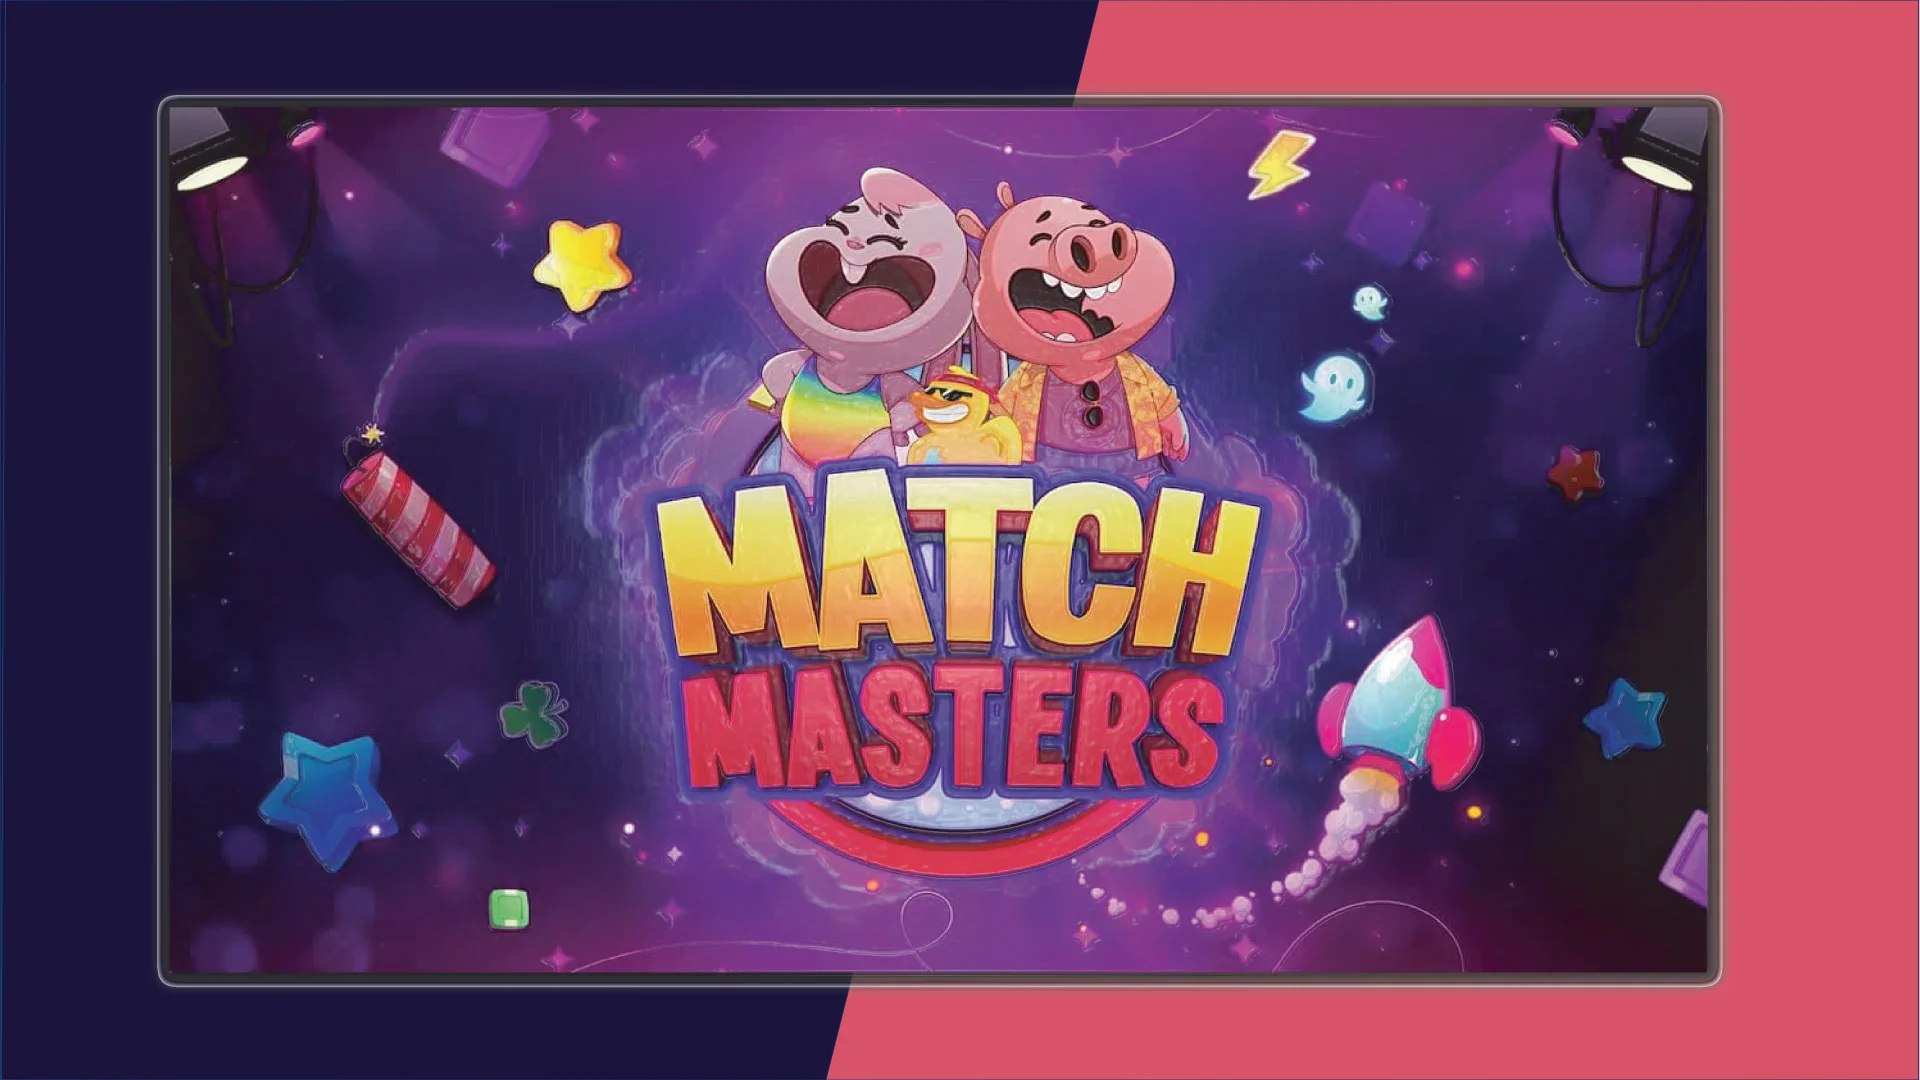 About Match Masters